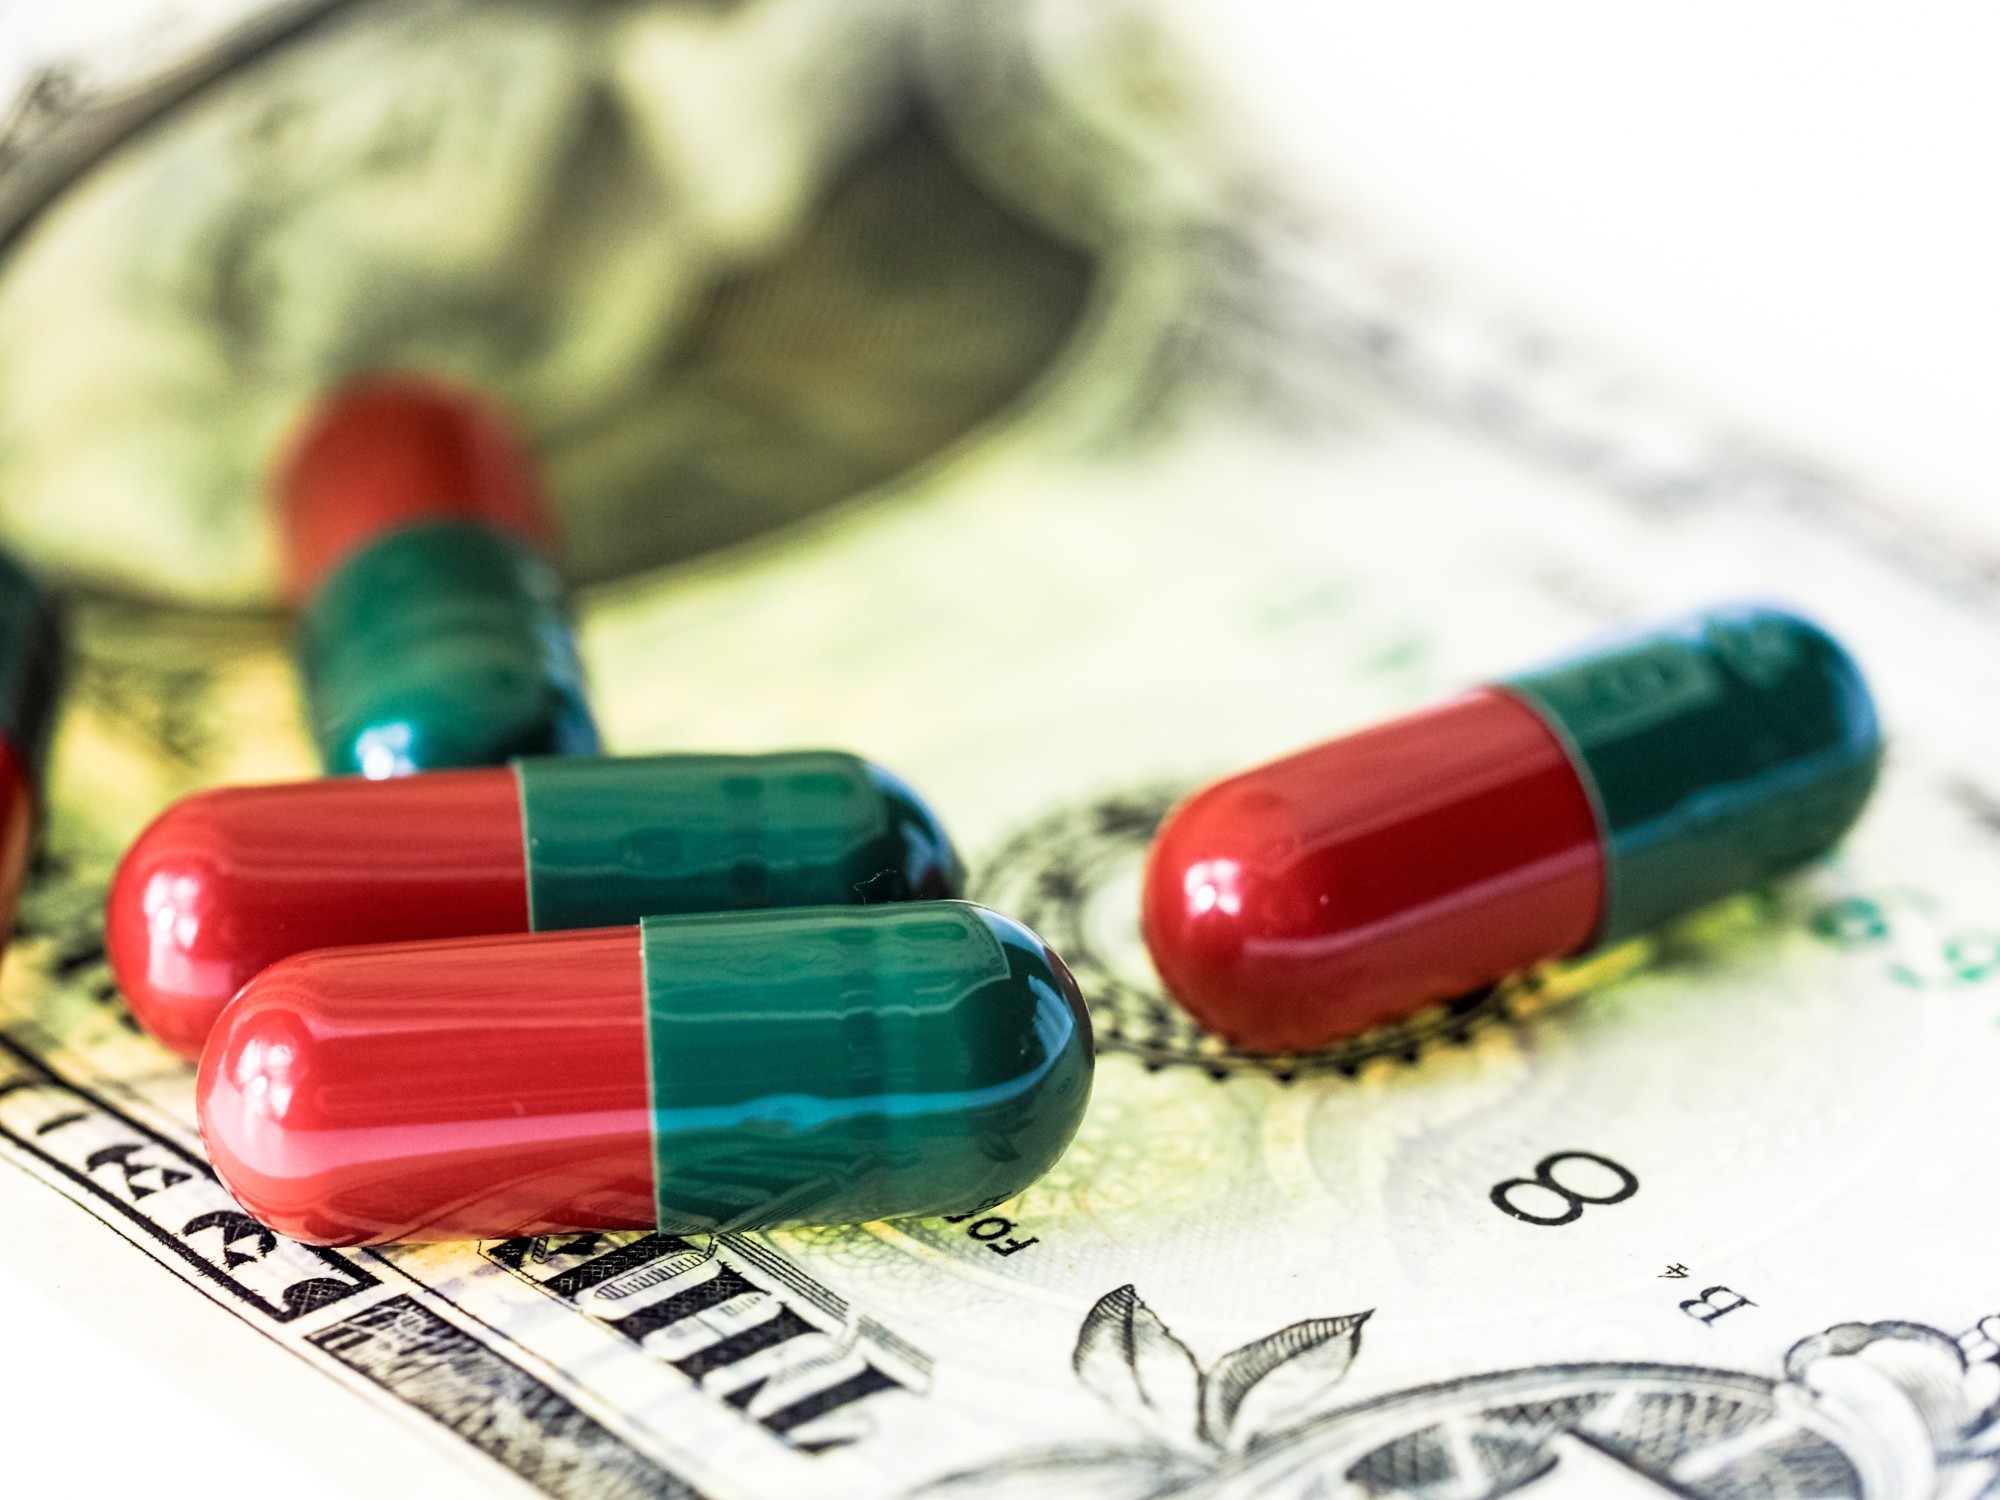 7 Ways to Save on Prescription Drugs Without Insurance